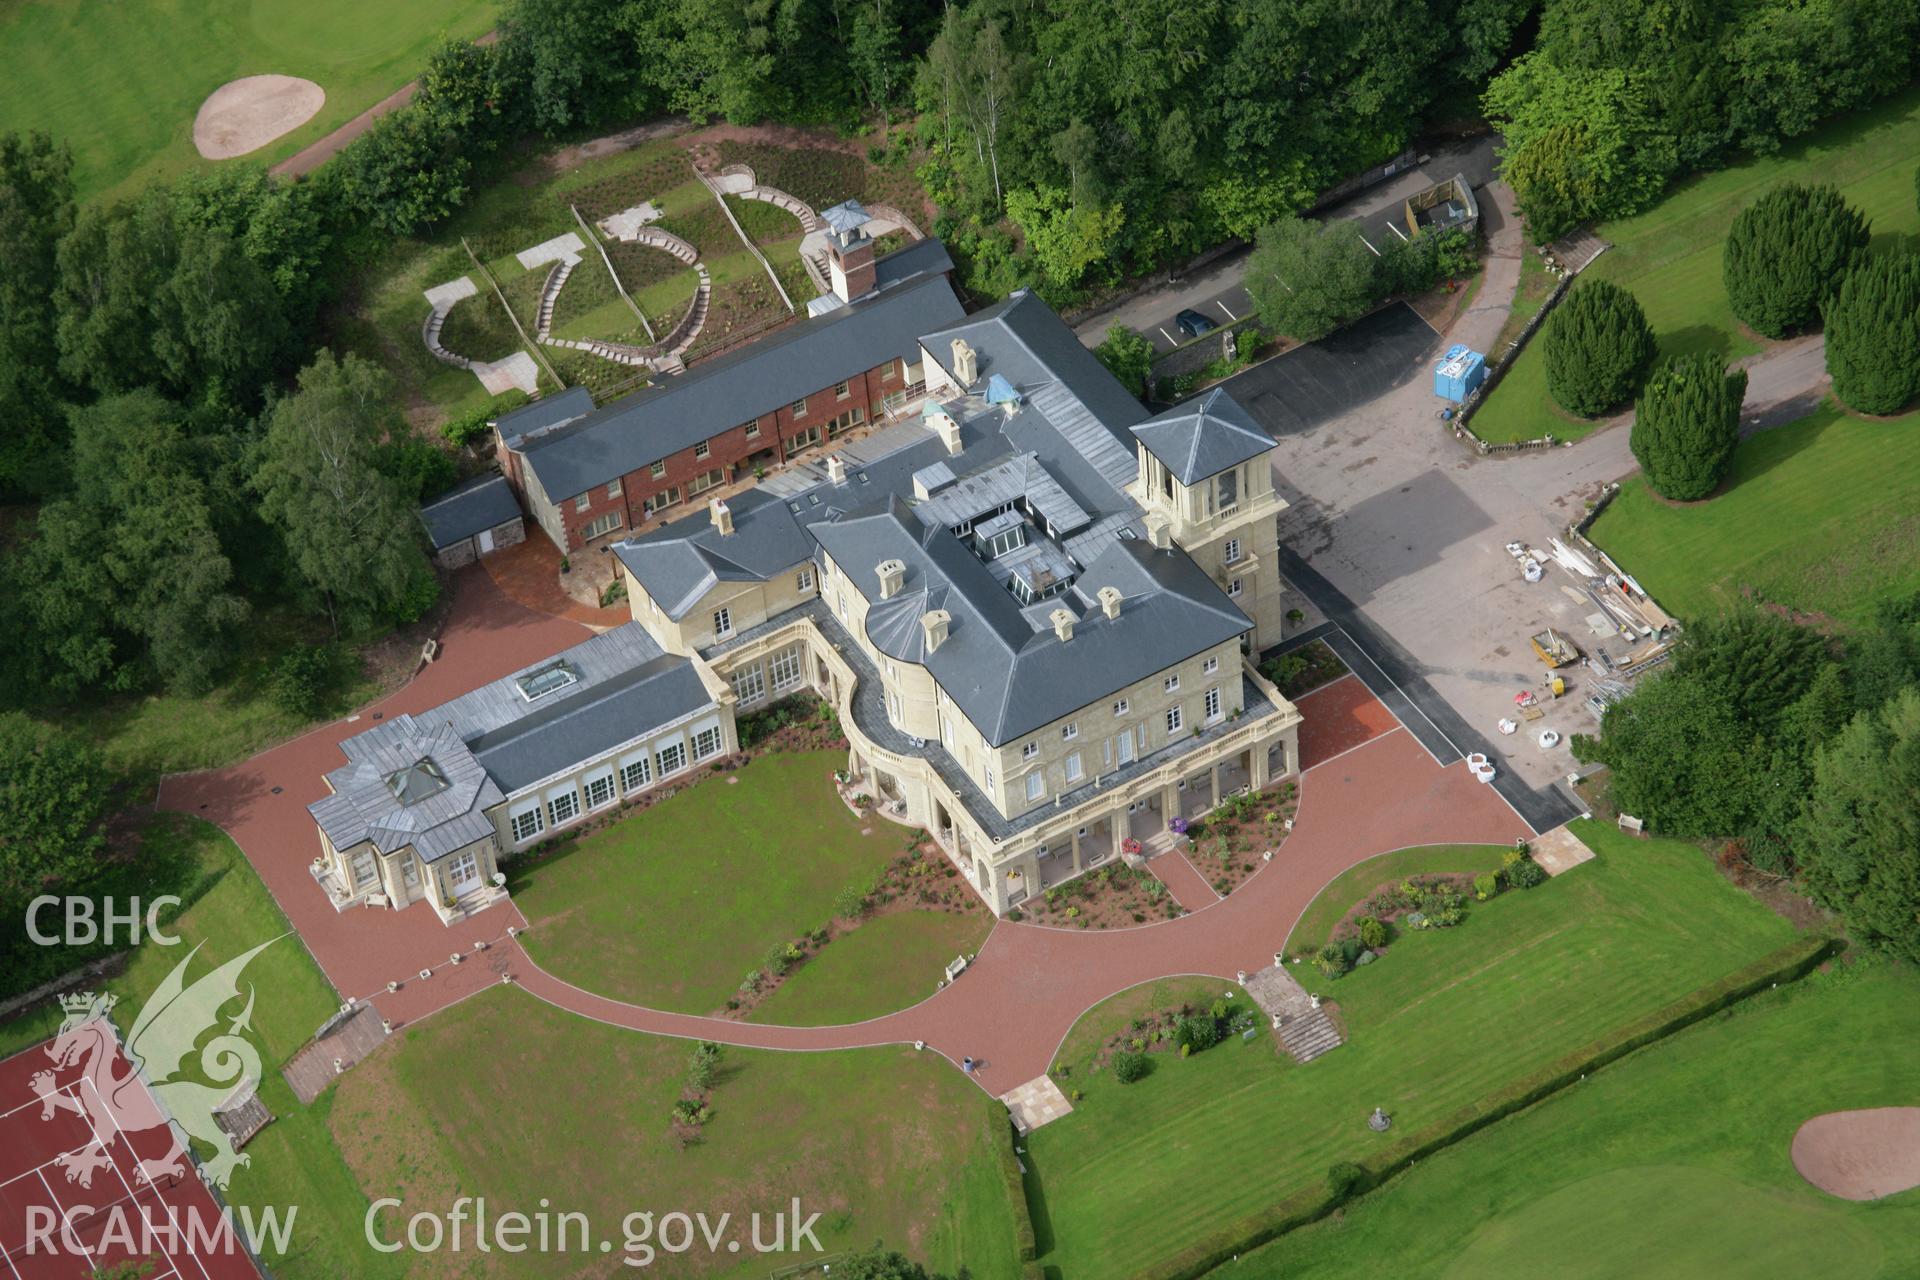 RCAHMW colour oblique aerial photograph of Penoyre House and Garden. Taken on 09 July 2007 by Toby Driver